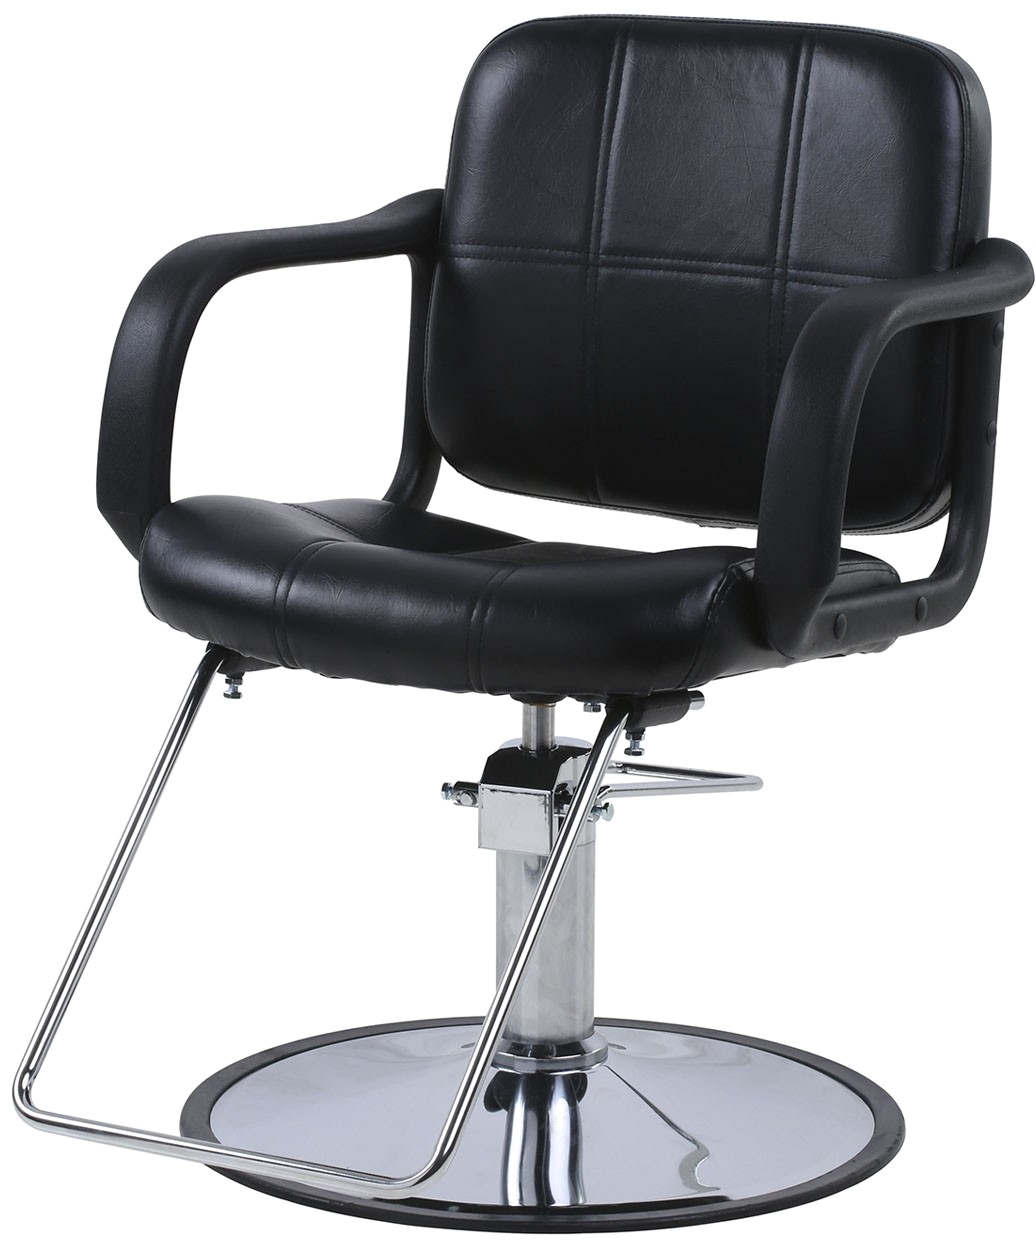 Portable Shampoo Chair for Sale Hydraulic Salon Styling Chair Chris Styling Chair Pump